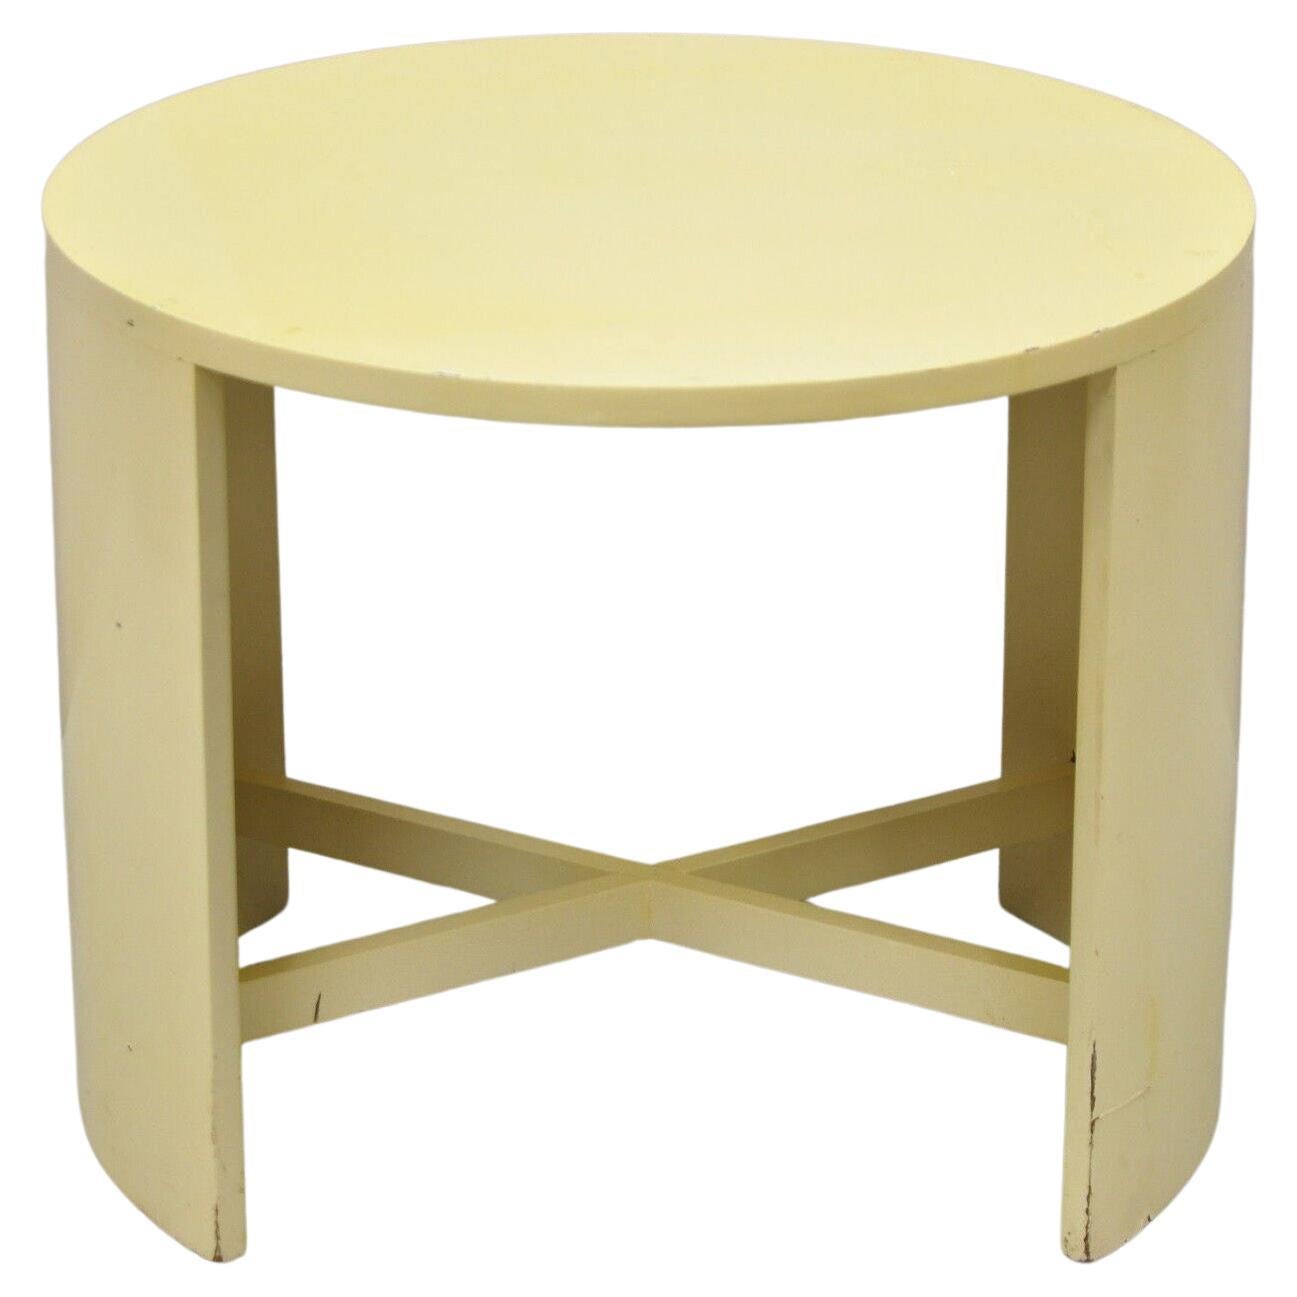 Midcentury Bone Lacquer Round Post Modernist Stretcher Base Accent Side Table For Sale